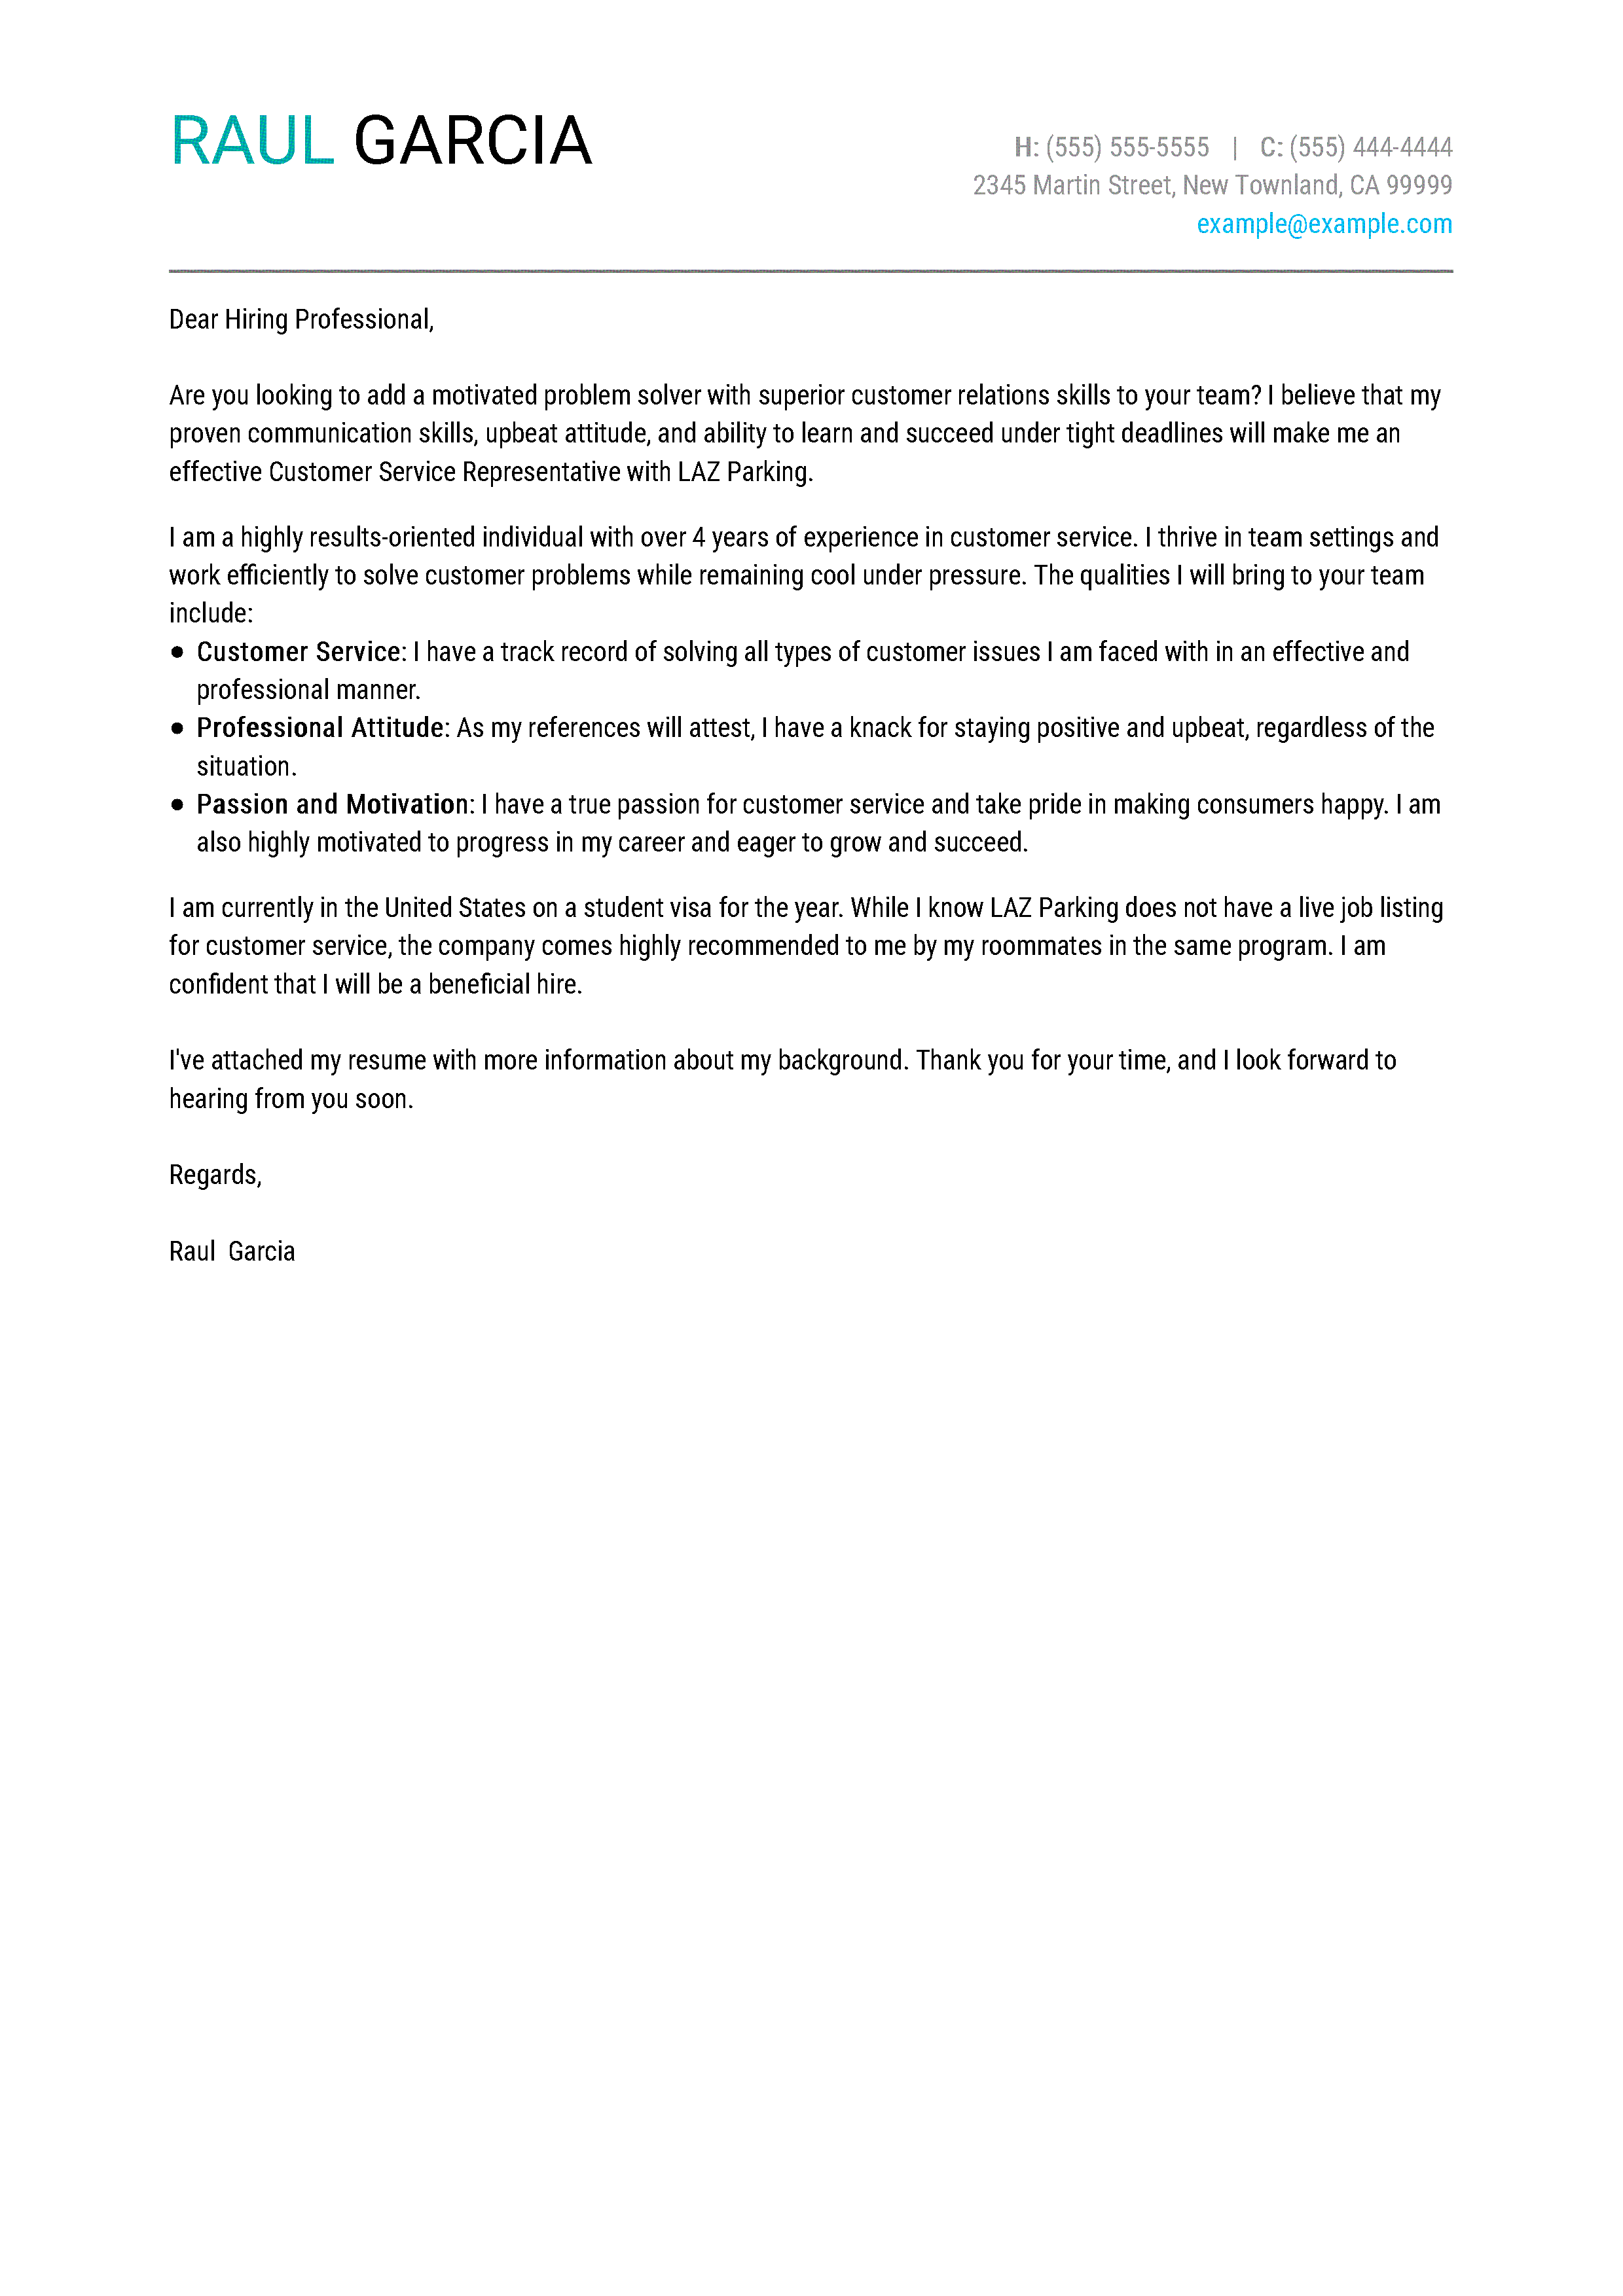 Housekeeping Cover Letter Sample from mthomearts.com